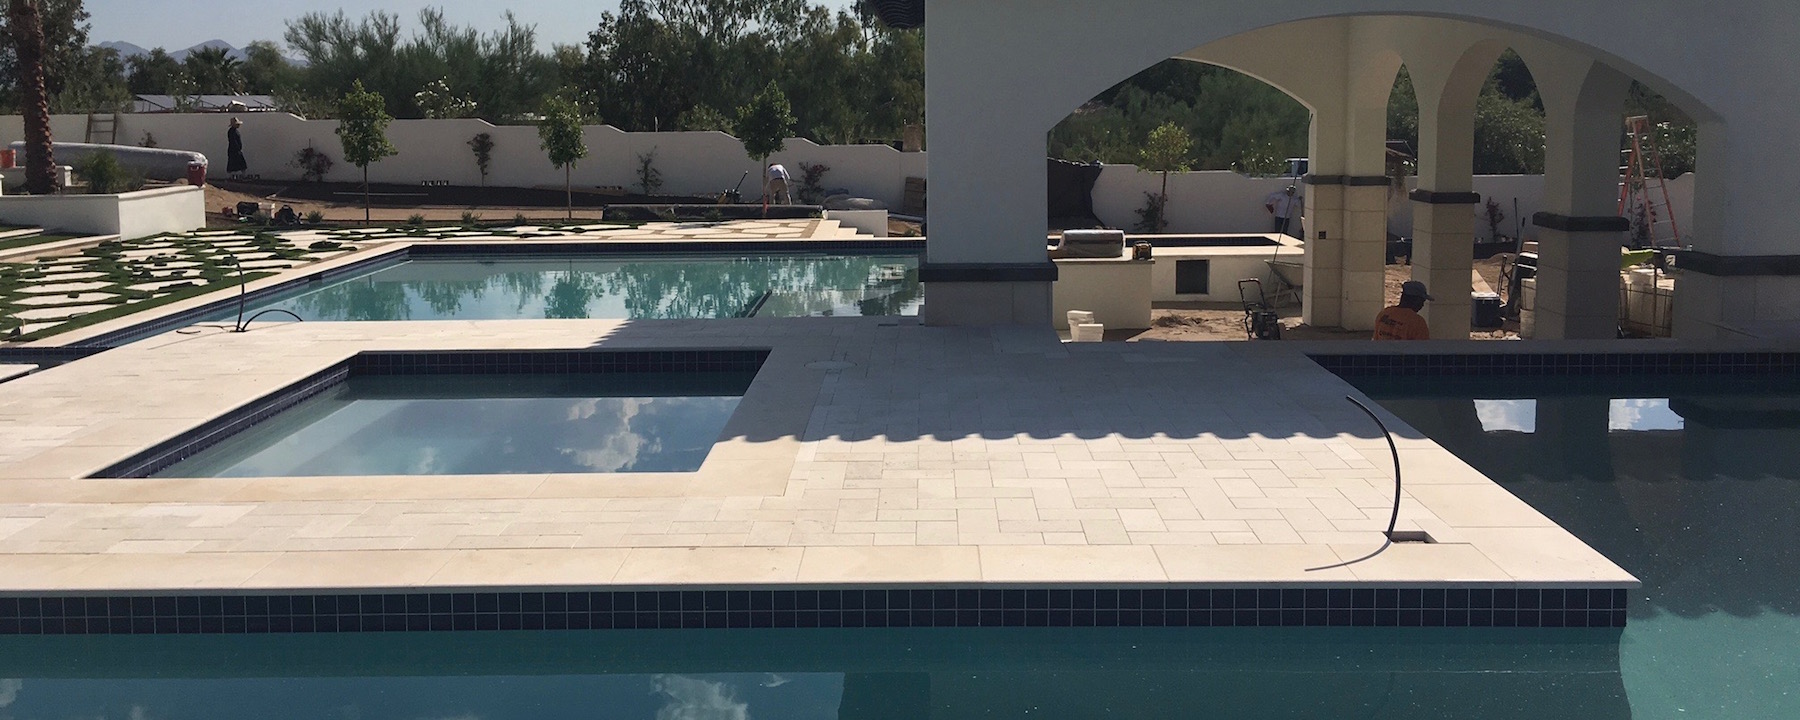 Pavers, Pool Coping, Custom Dark Color Design Accent on Columns, Wall Coping